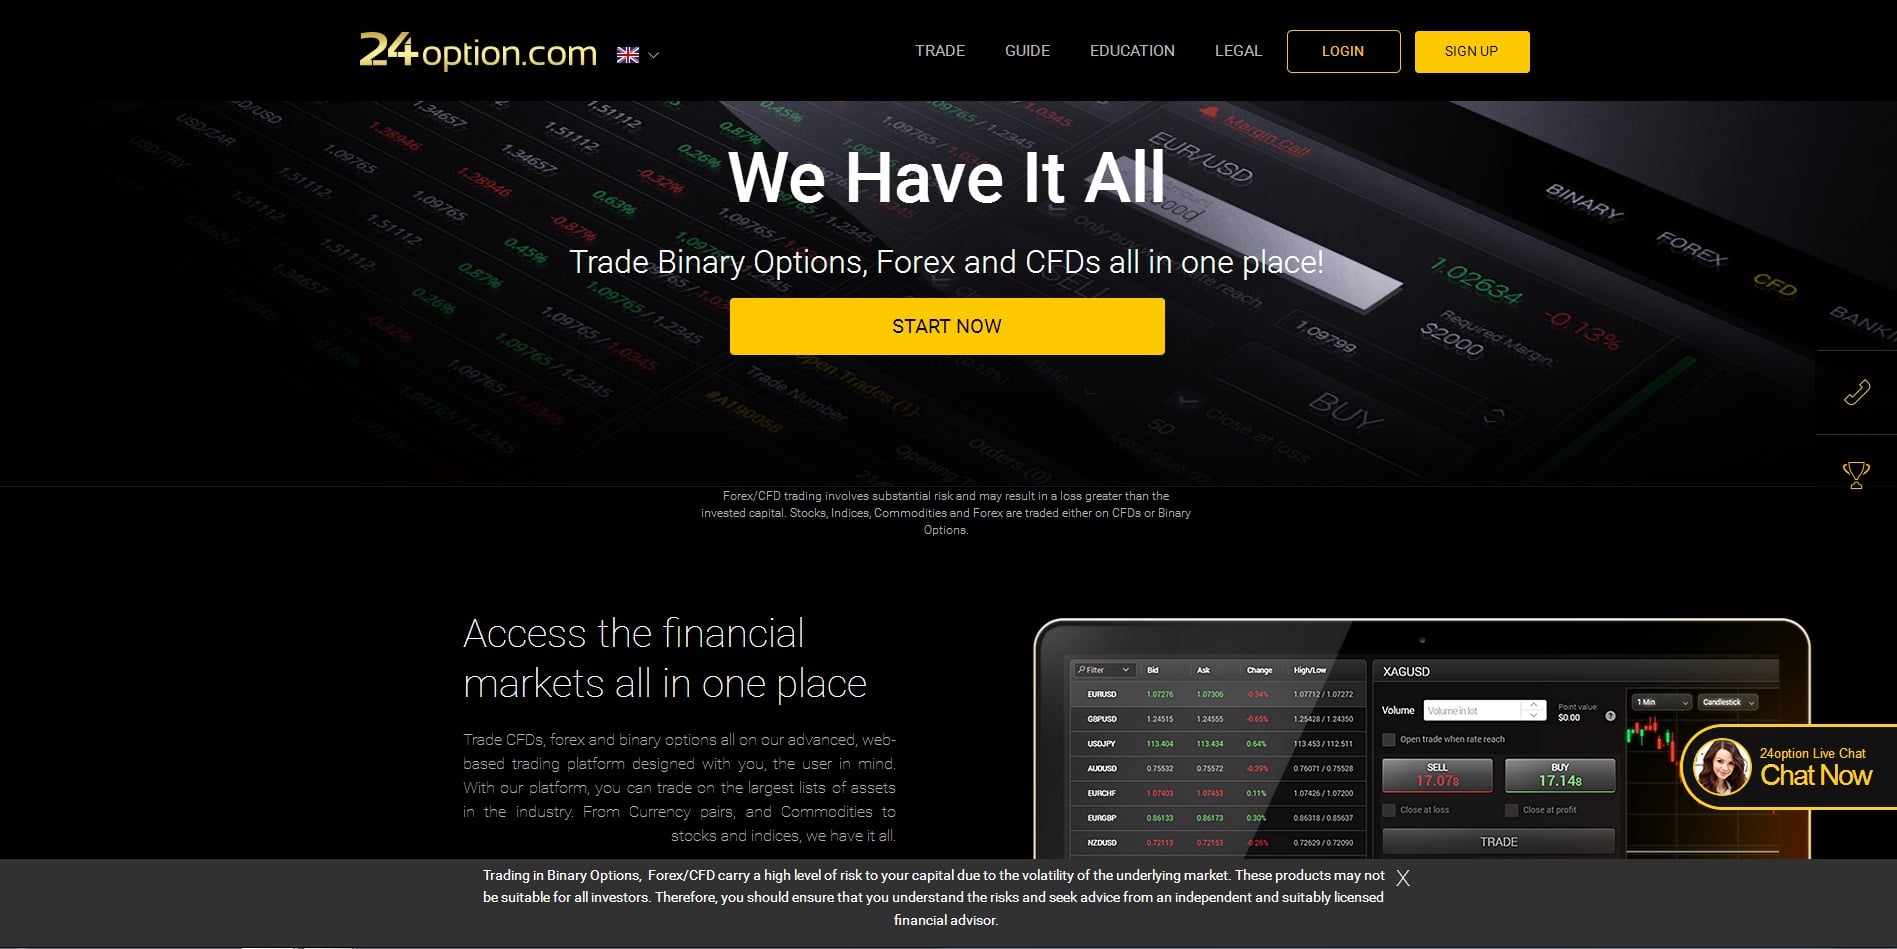 Is trading binary options legal in the united states